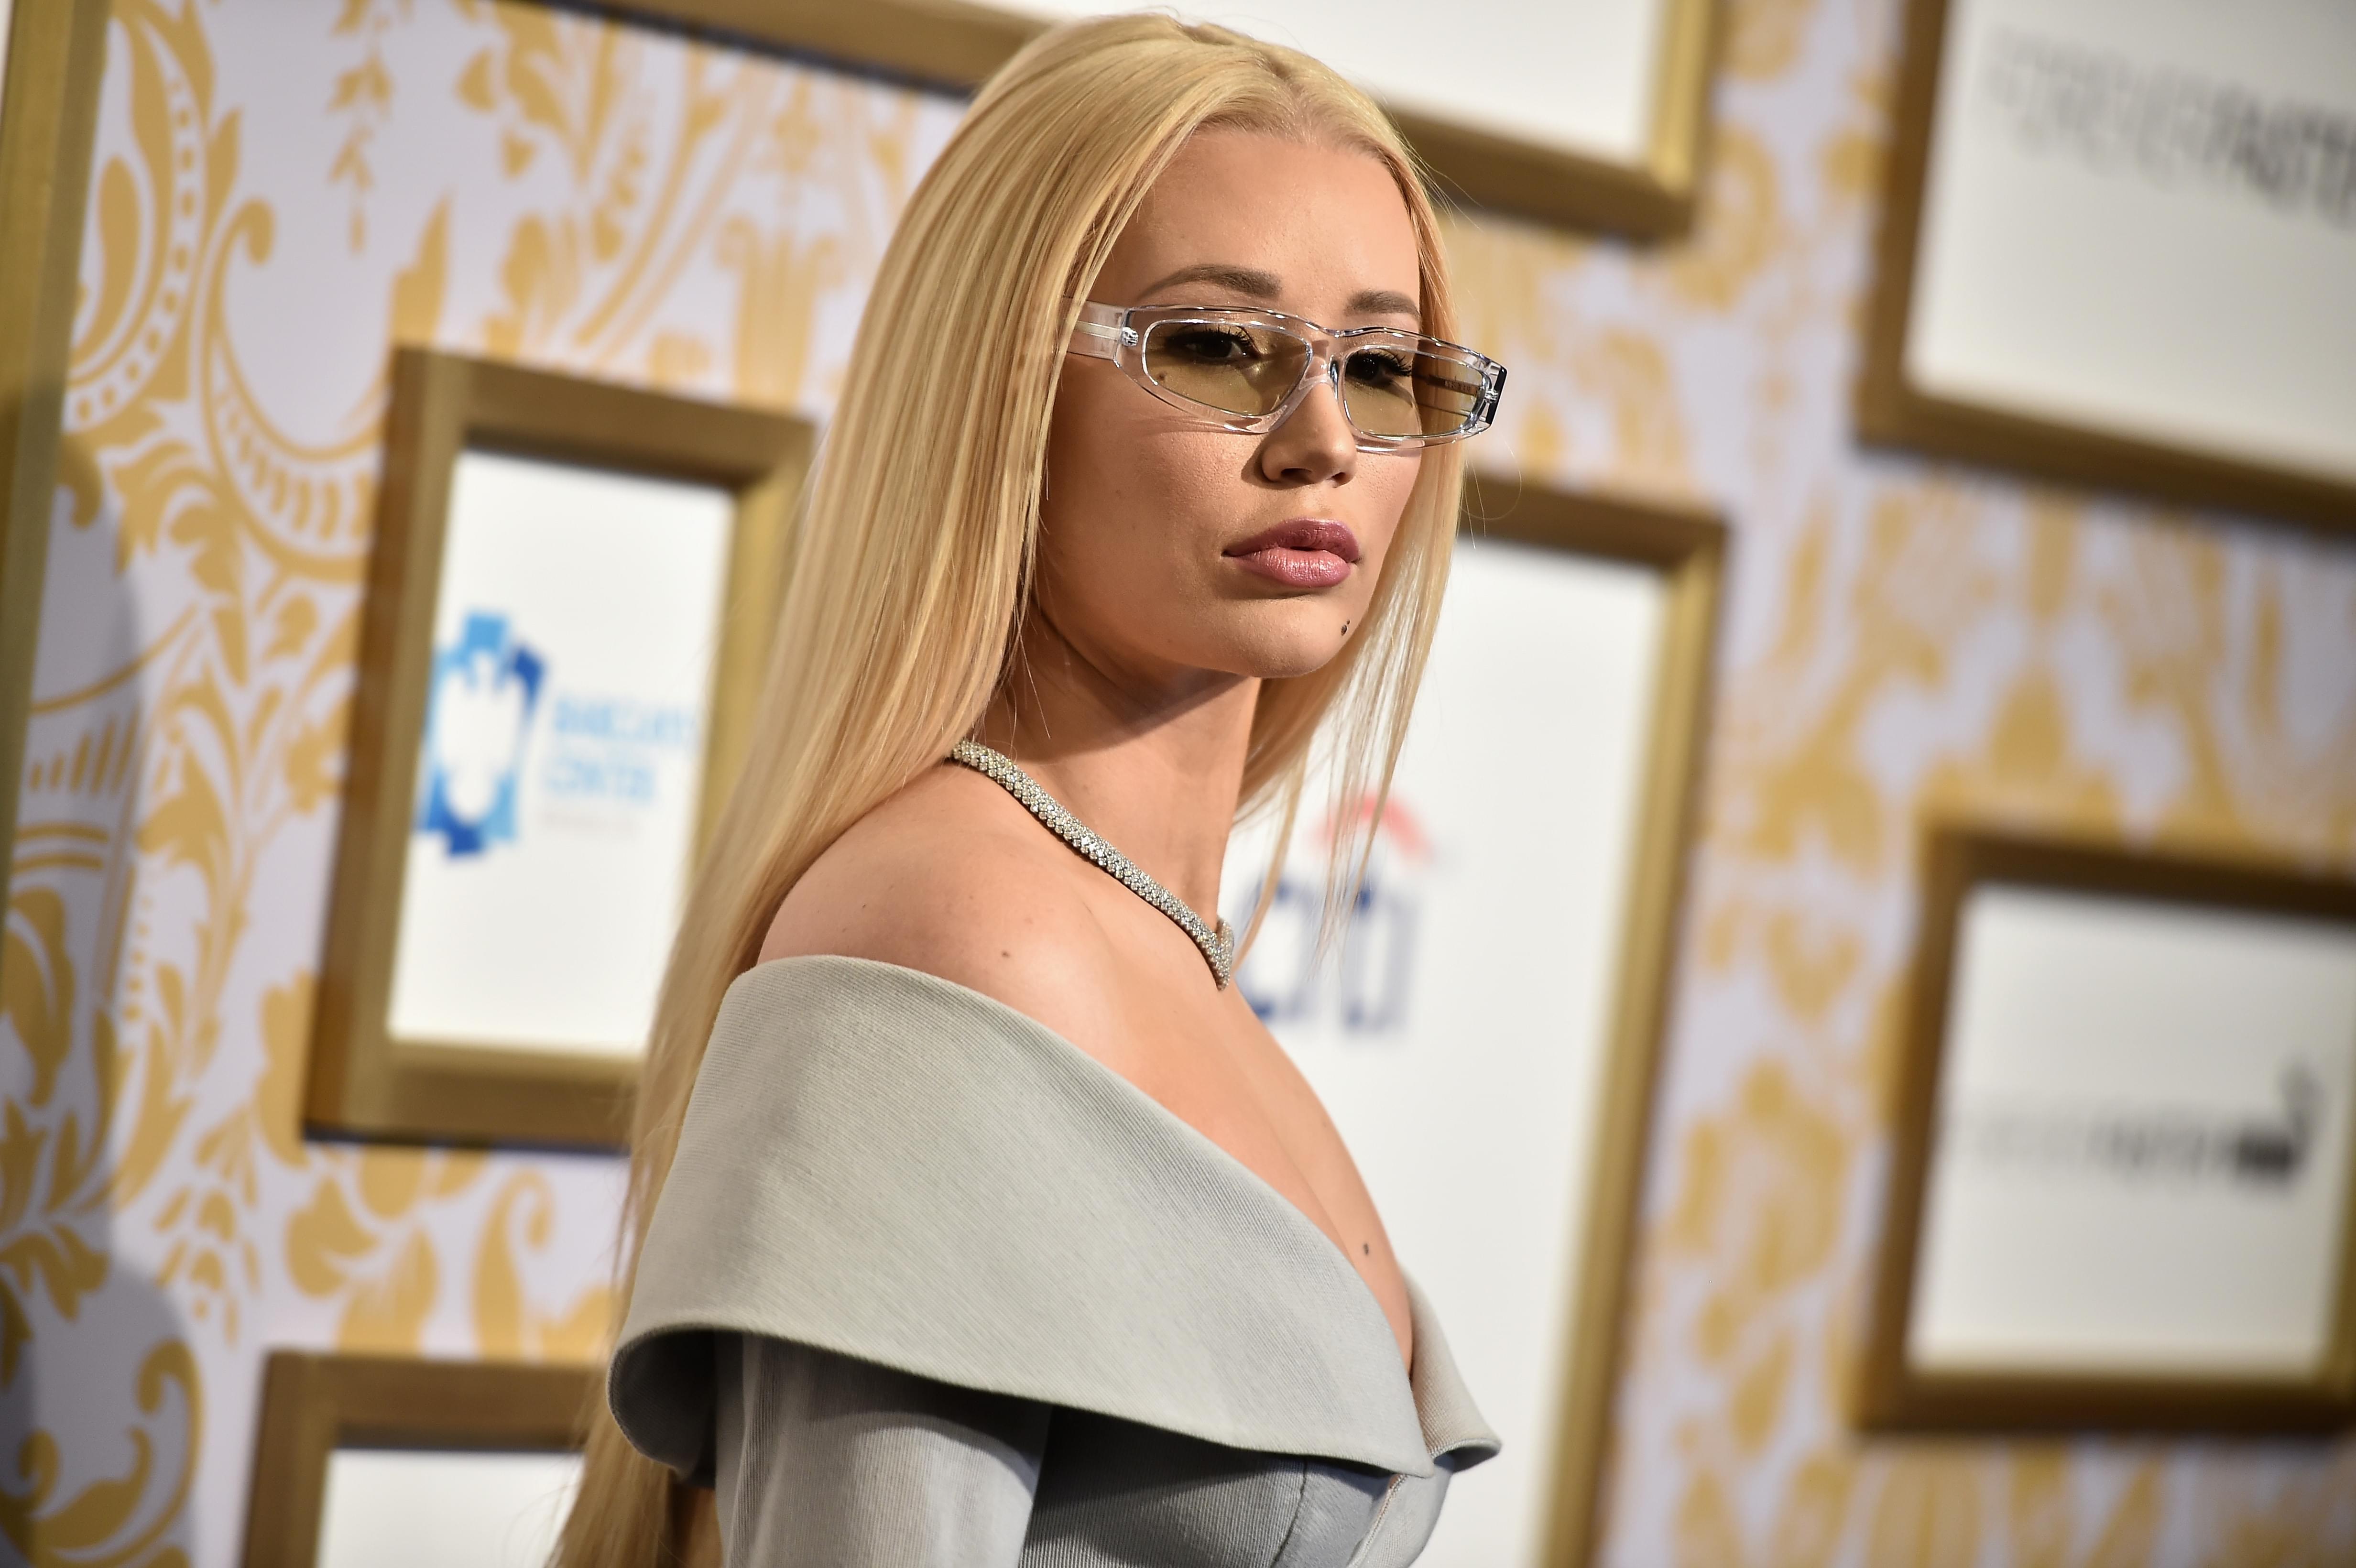 Iggy Azalea Claps Back At Wendy Williams And Calls Her A ‘Crack Head’